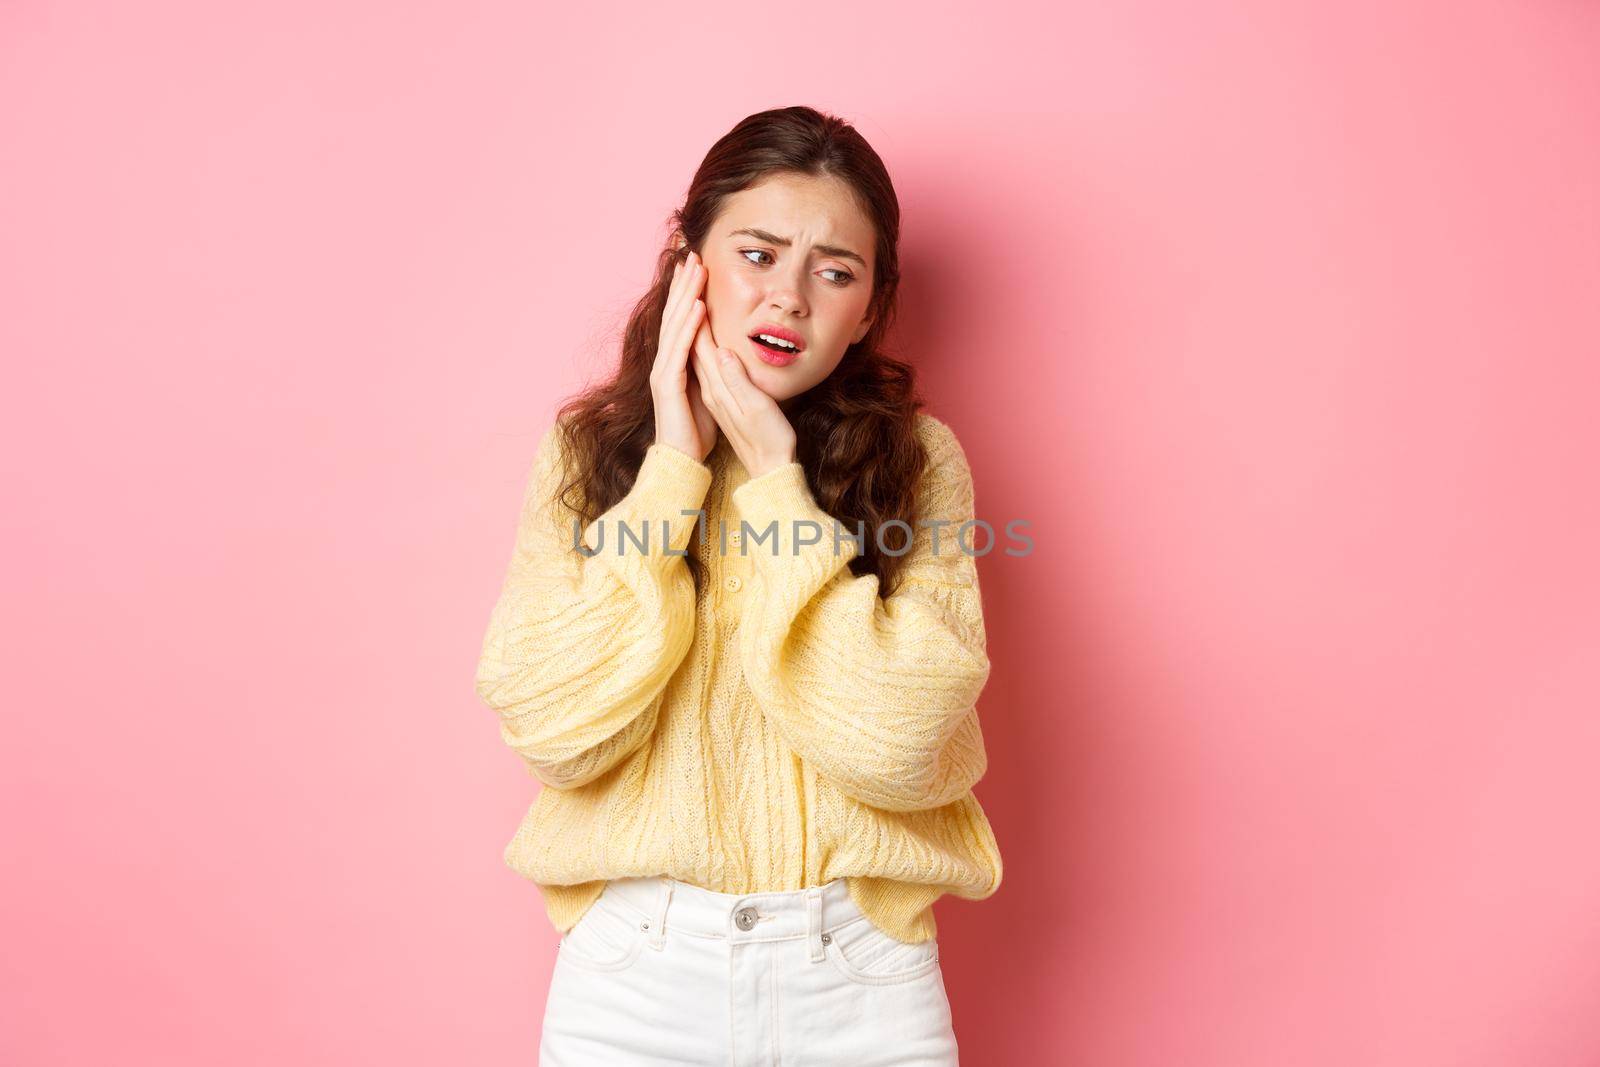 Young woman having toothache, touching swallen cheek and grimacing from pain, need to see dentist, stomatology appointment, standing against pink background.